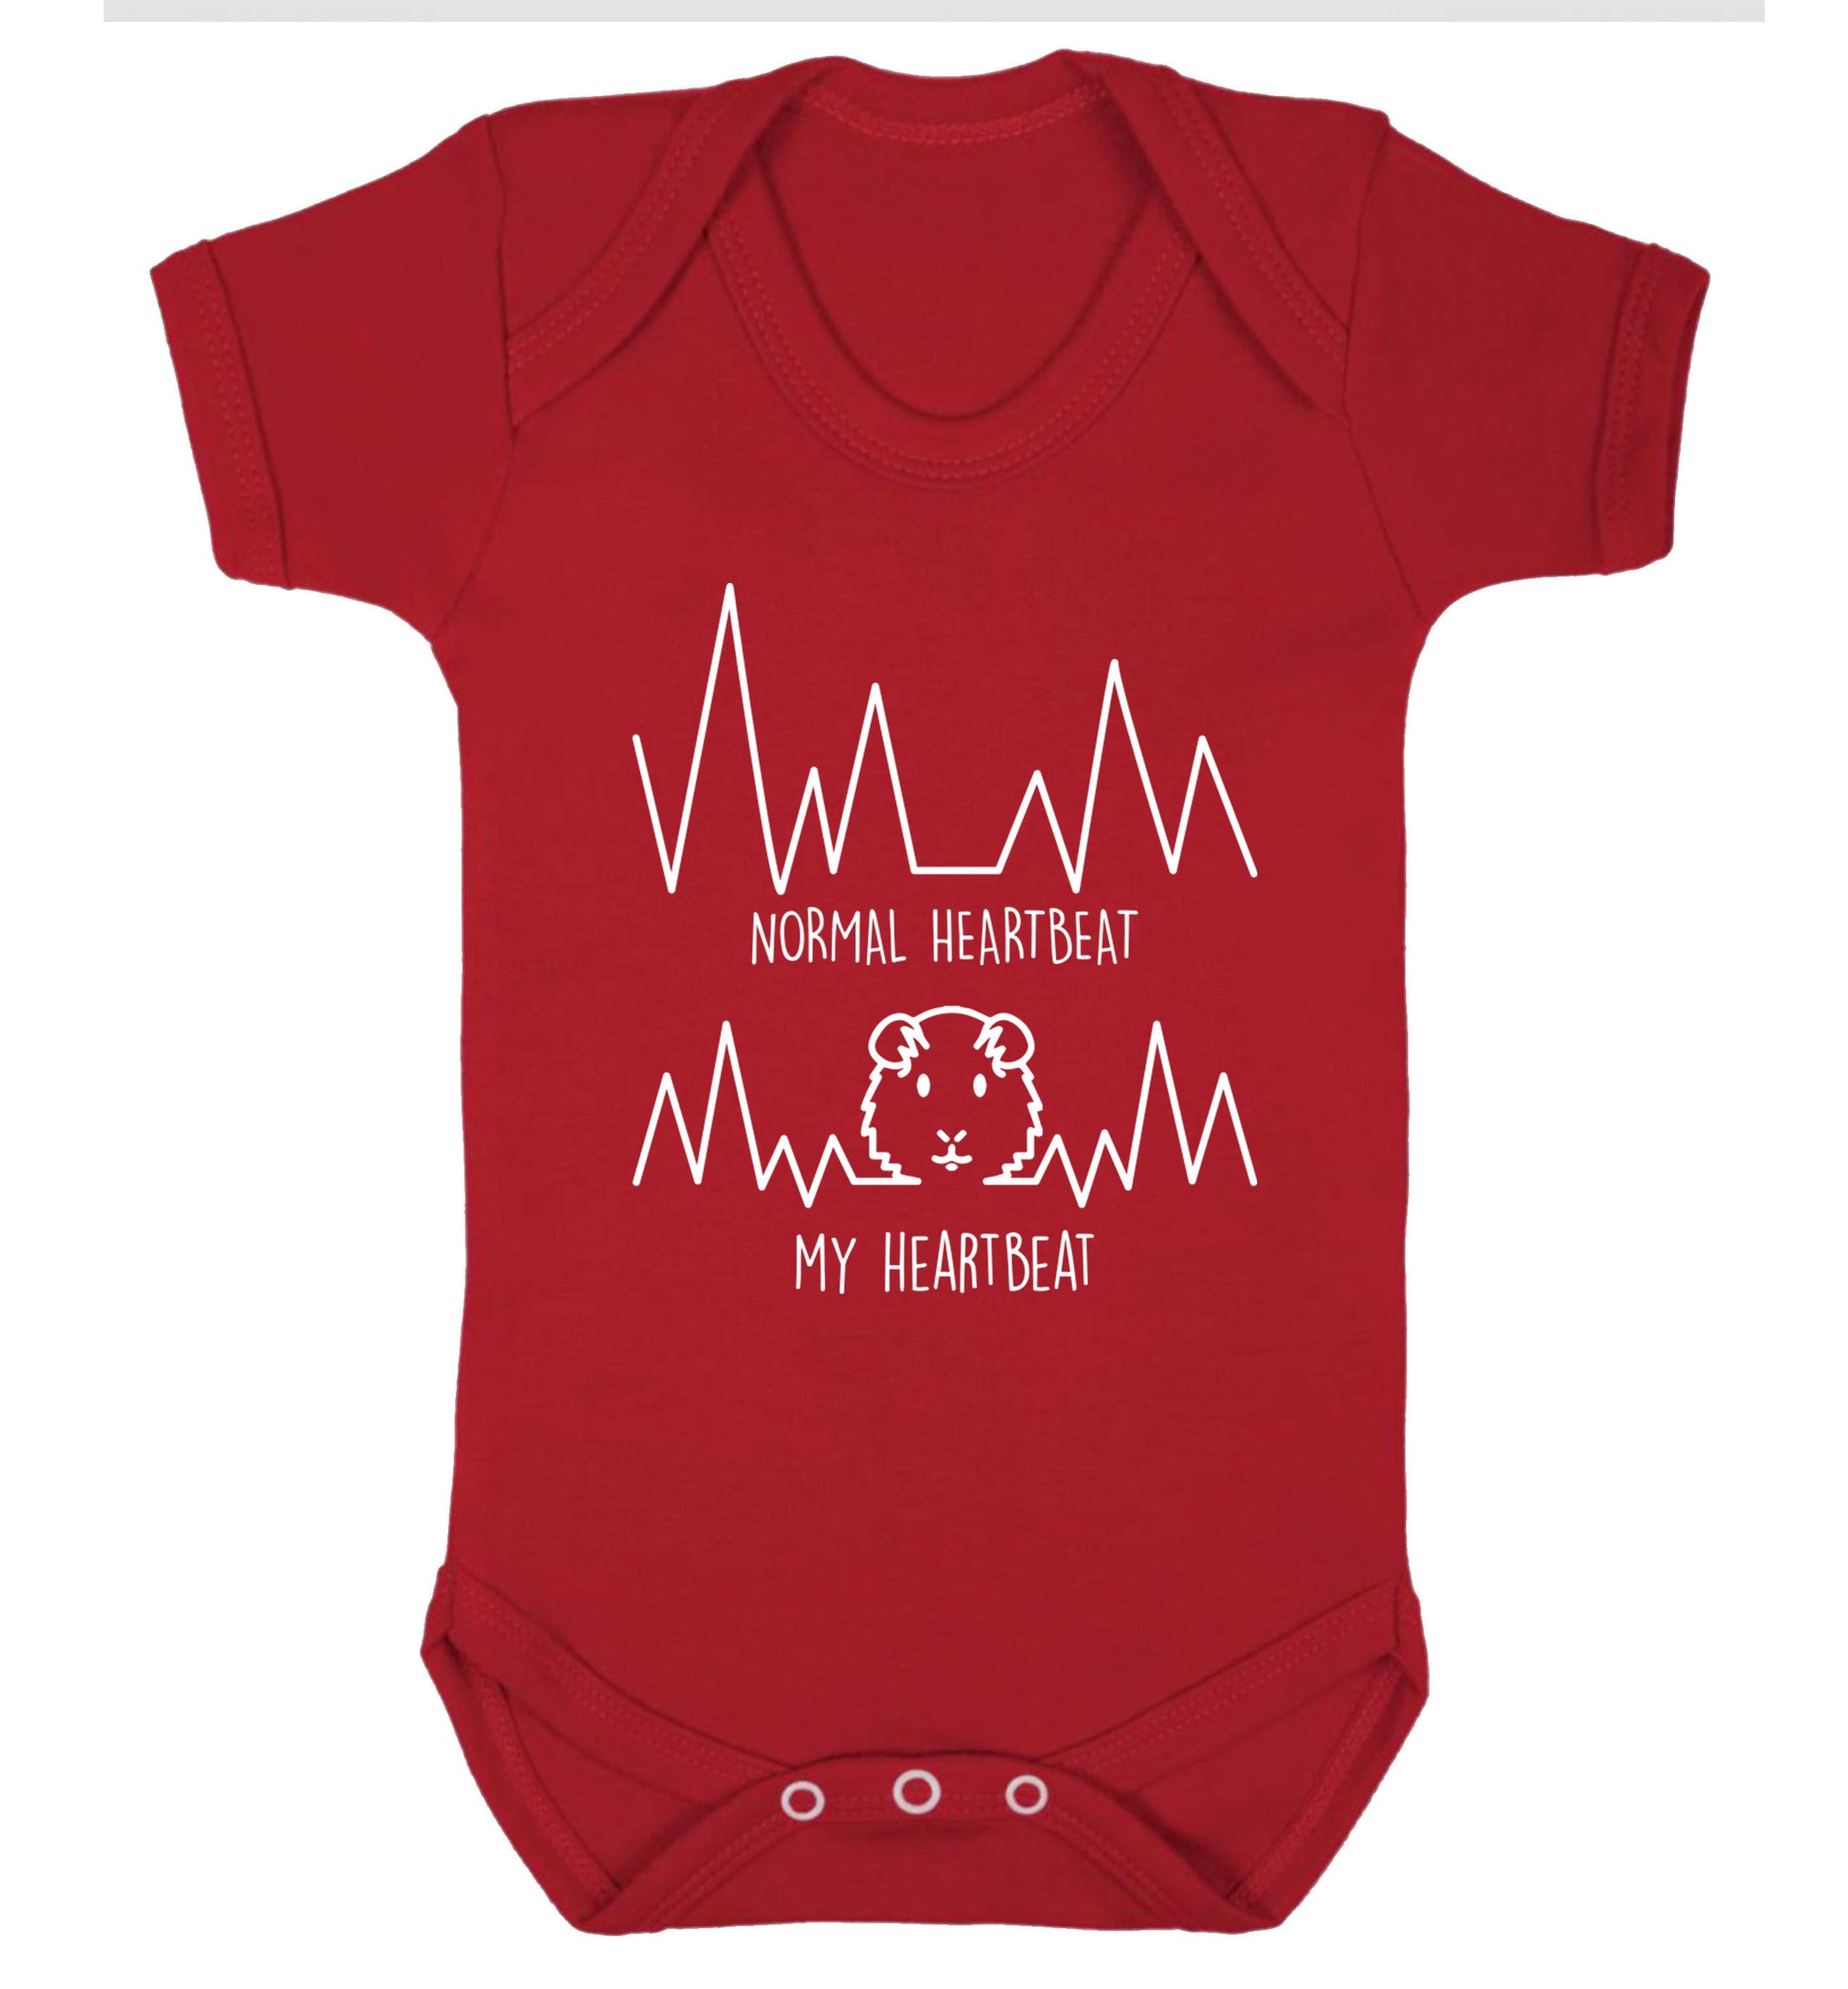 Normal heartbeat vs my heartbeat guinea pig lover Baby Vest red 18-24 months